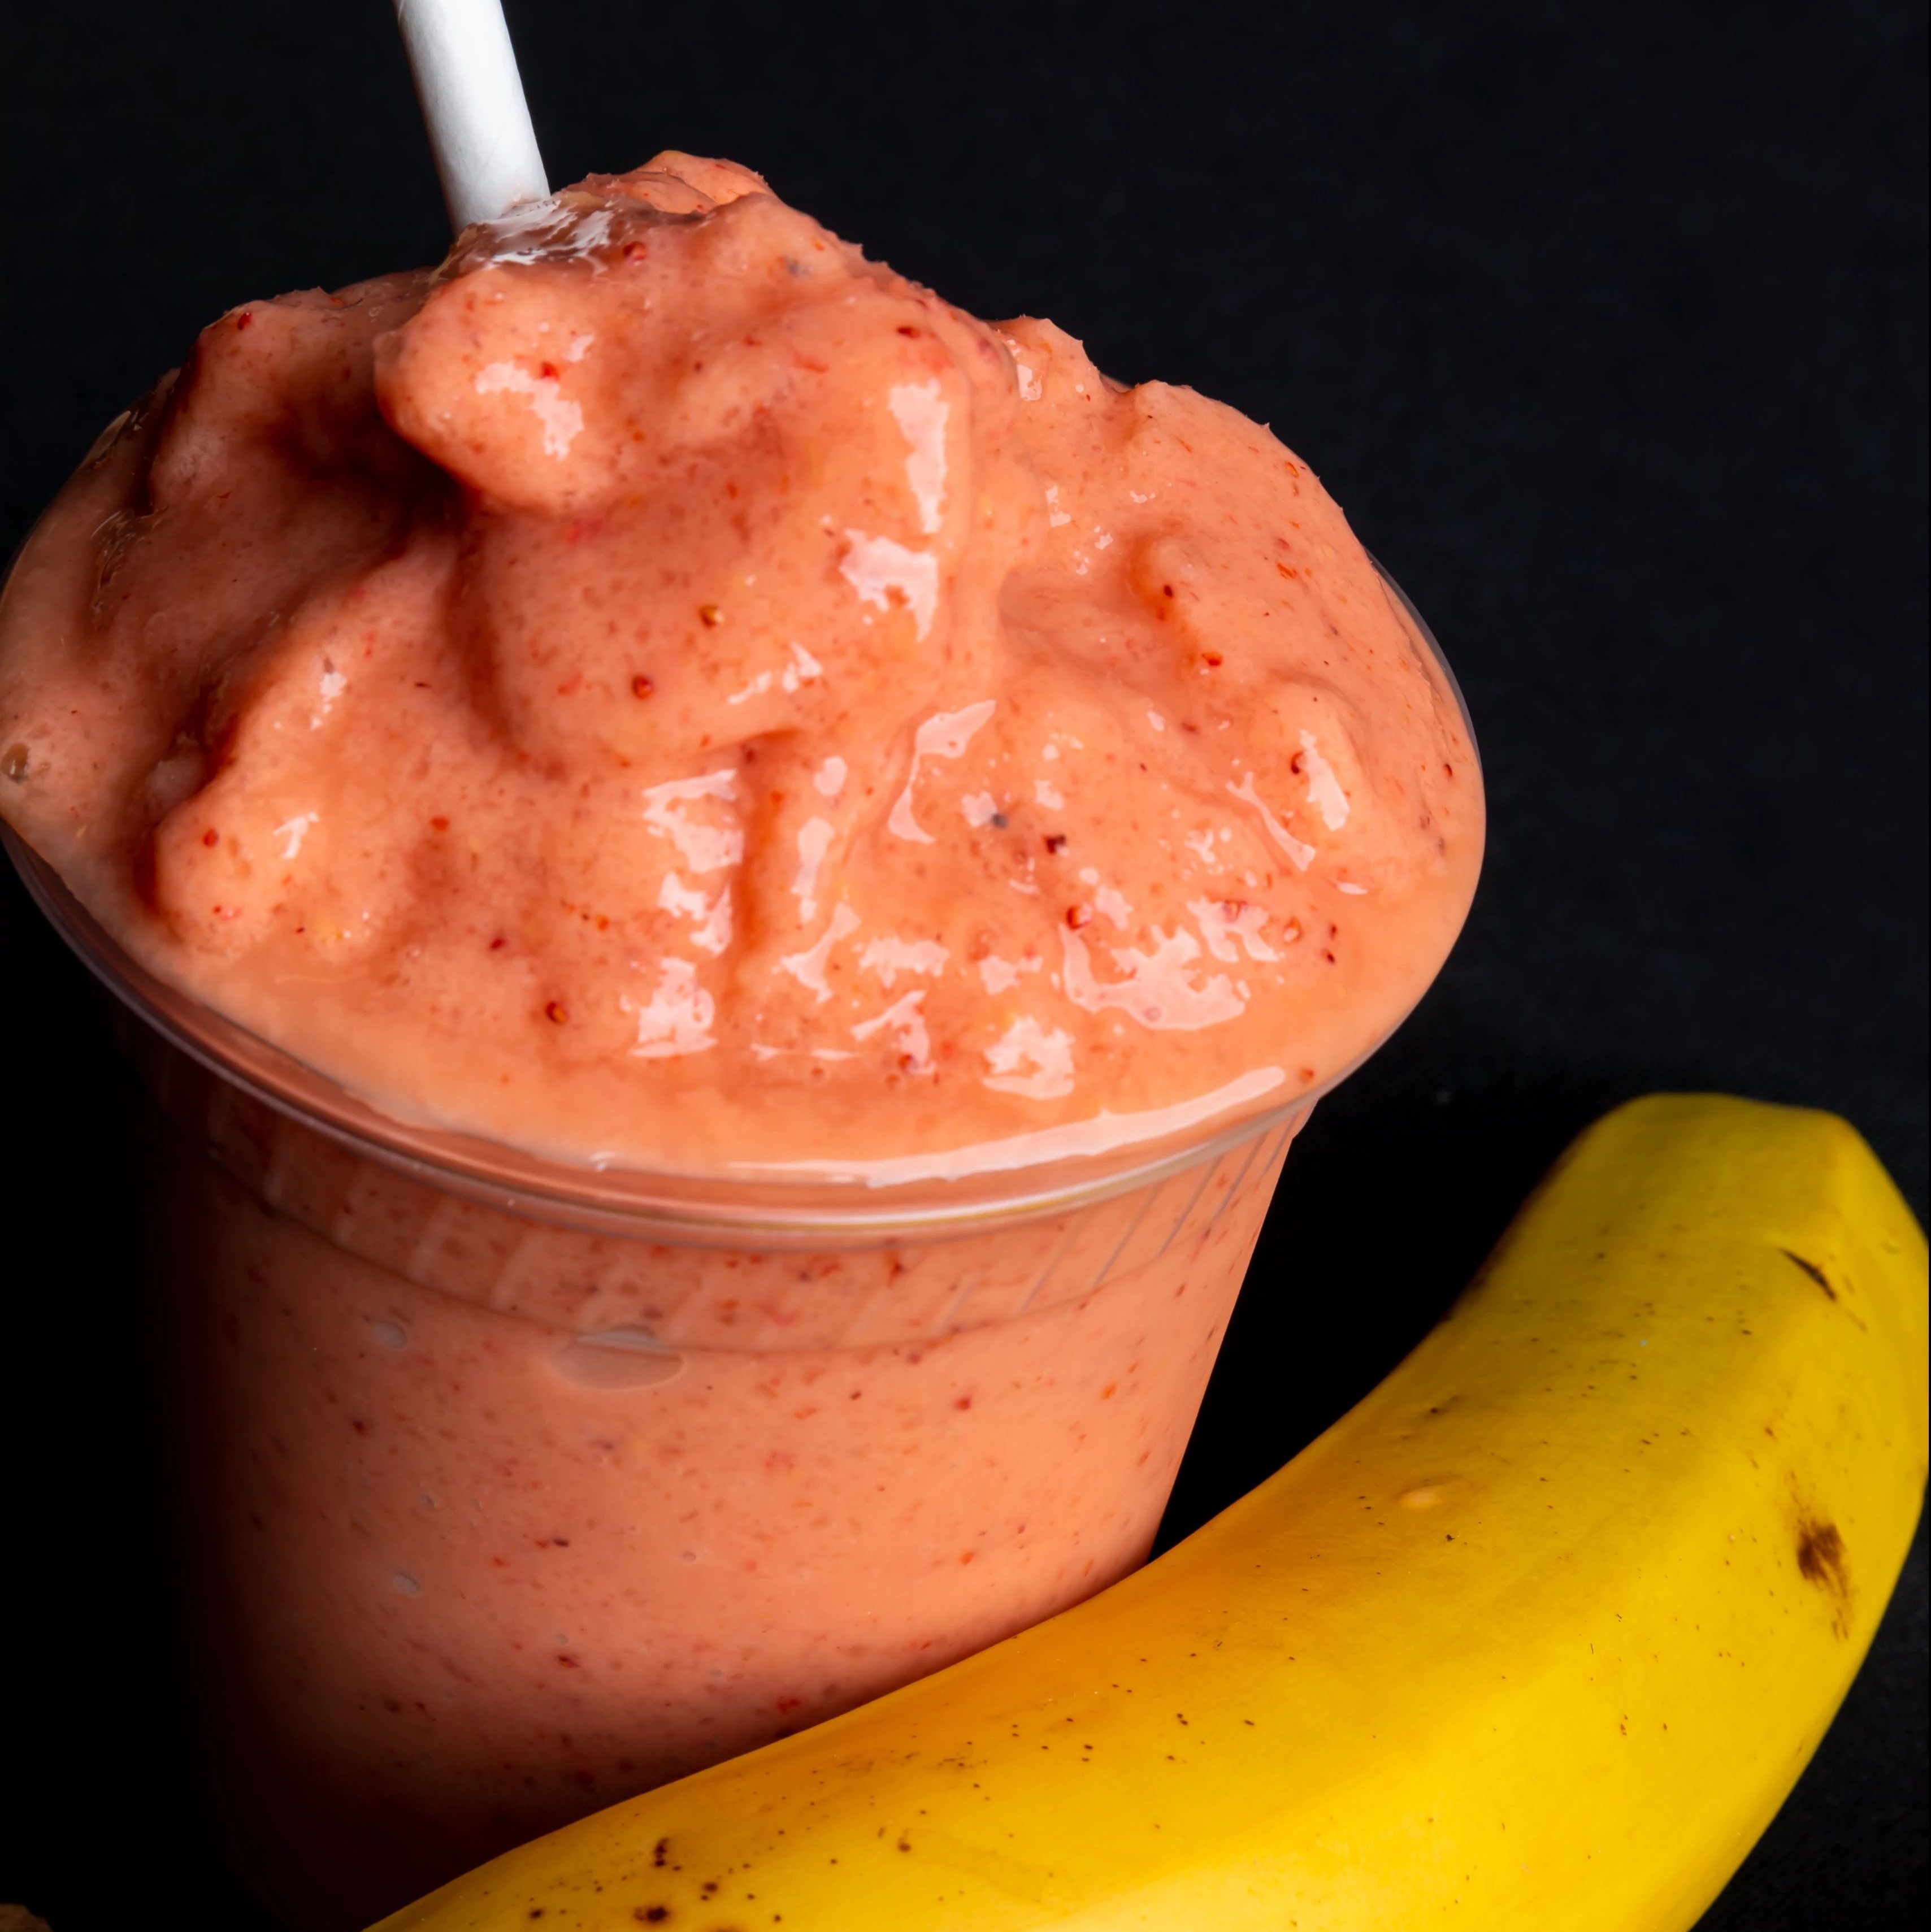 Smoothie with banana